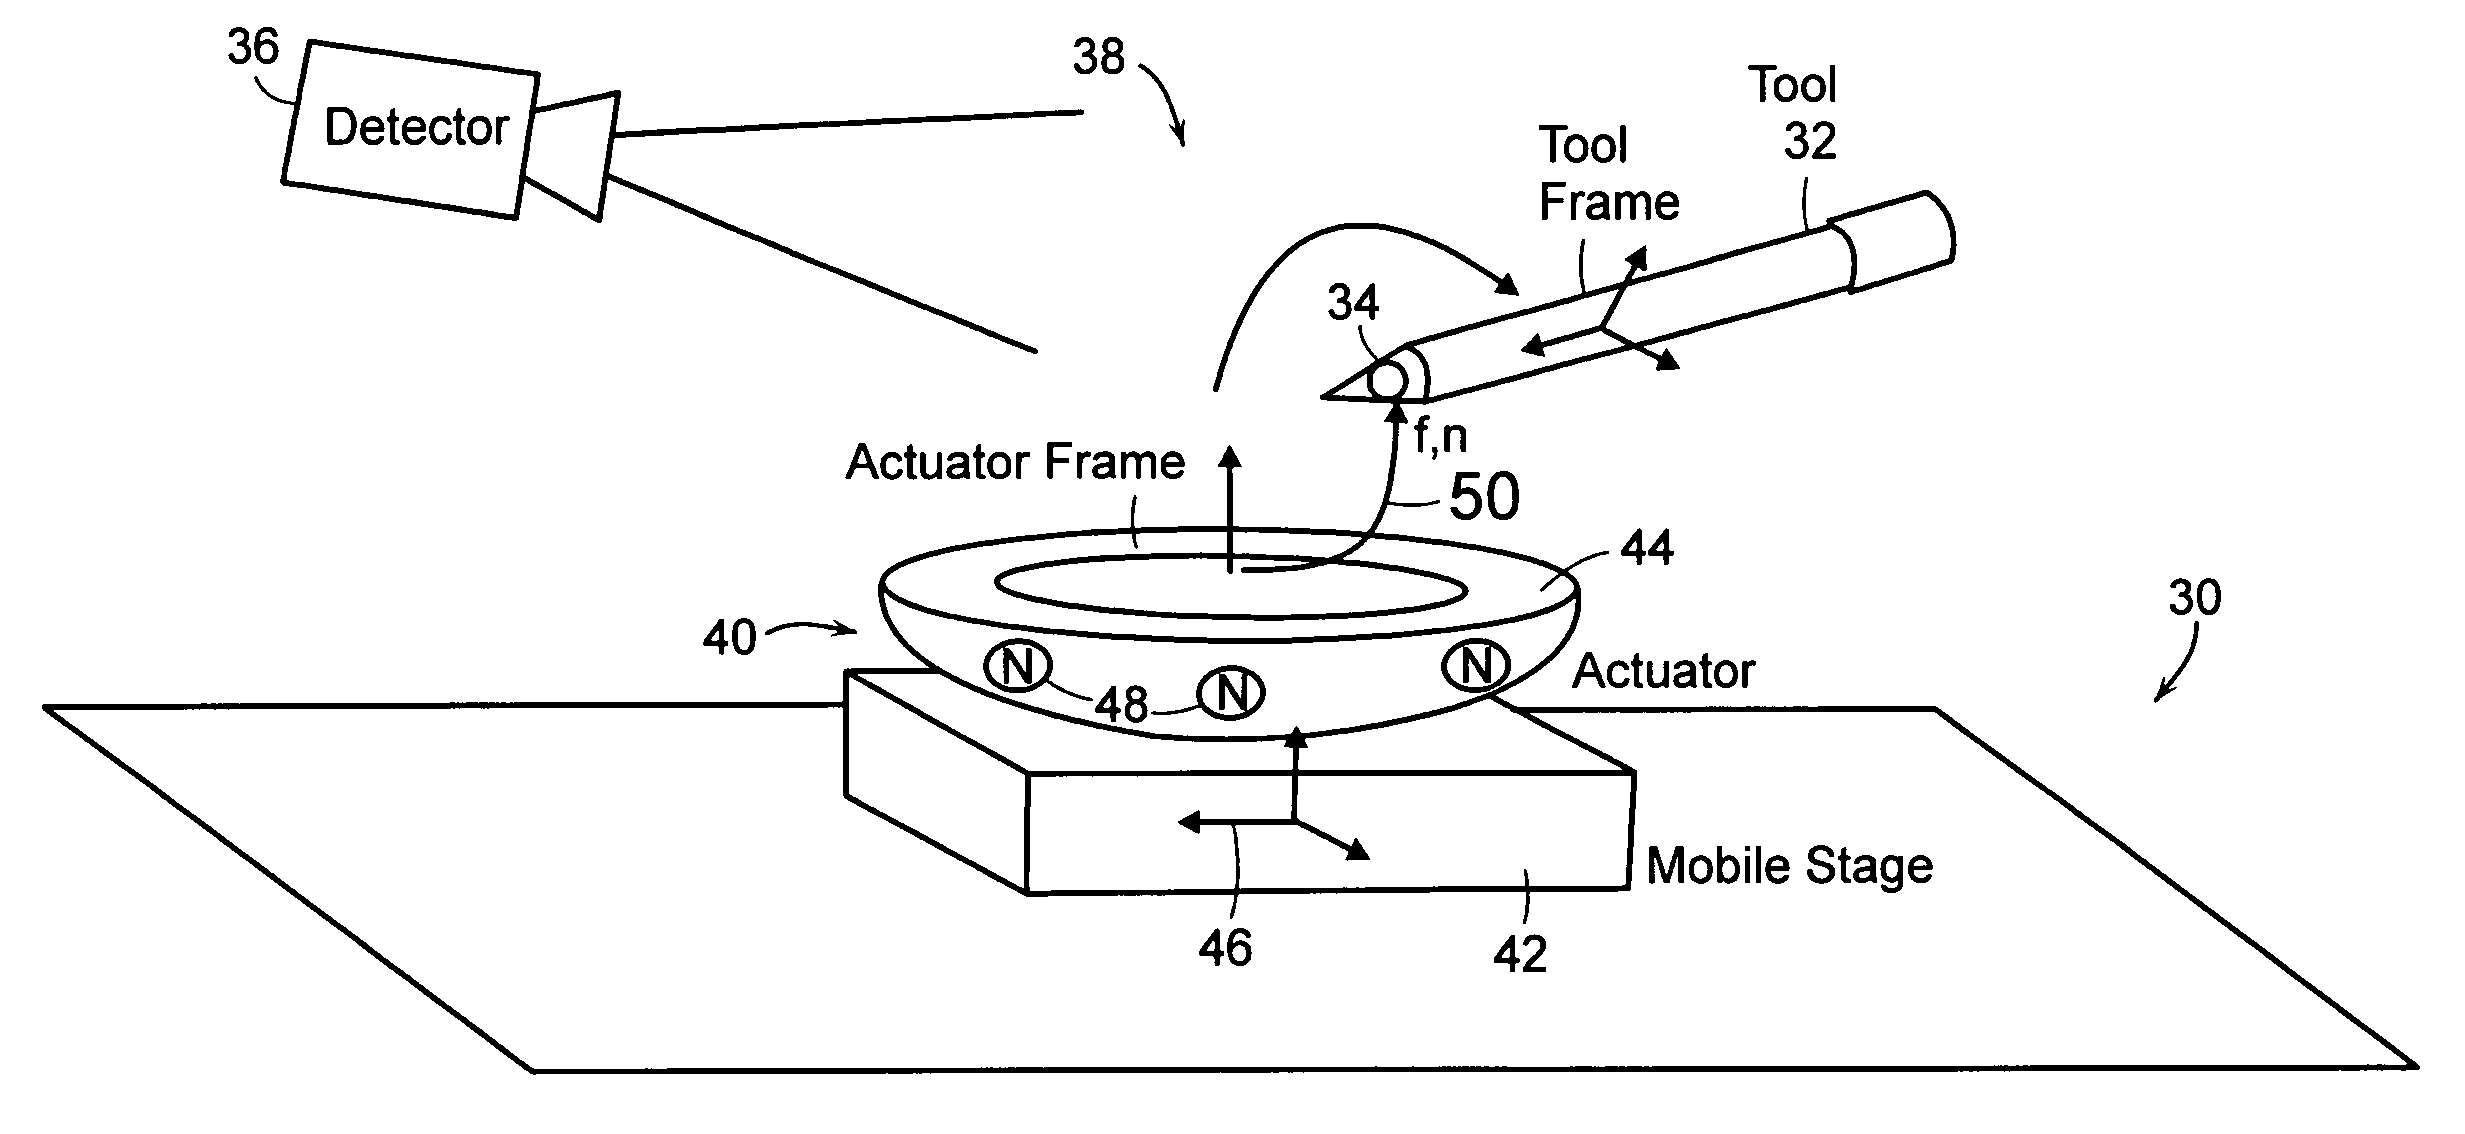 Magnetic haptic feedback systems and methods for virtual reality environments